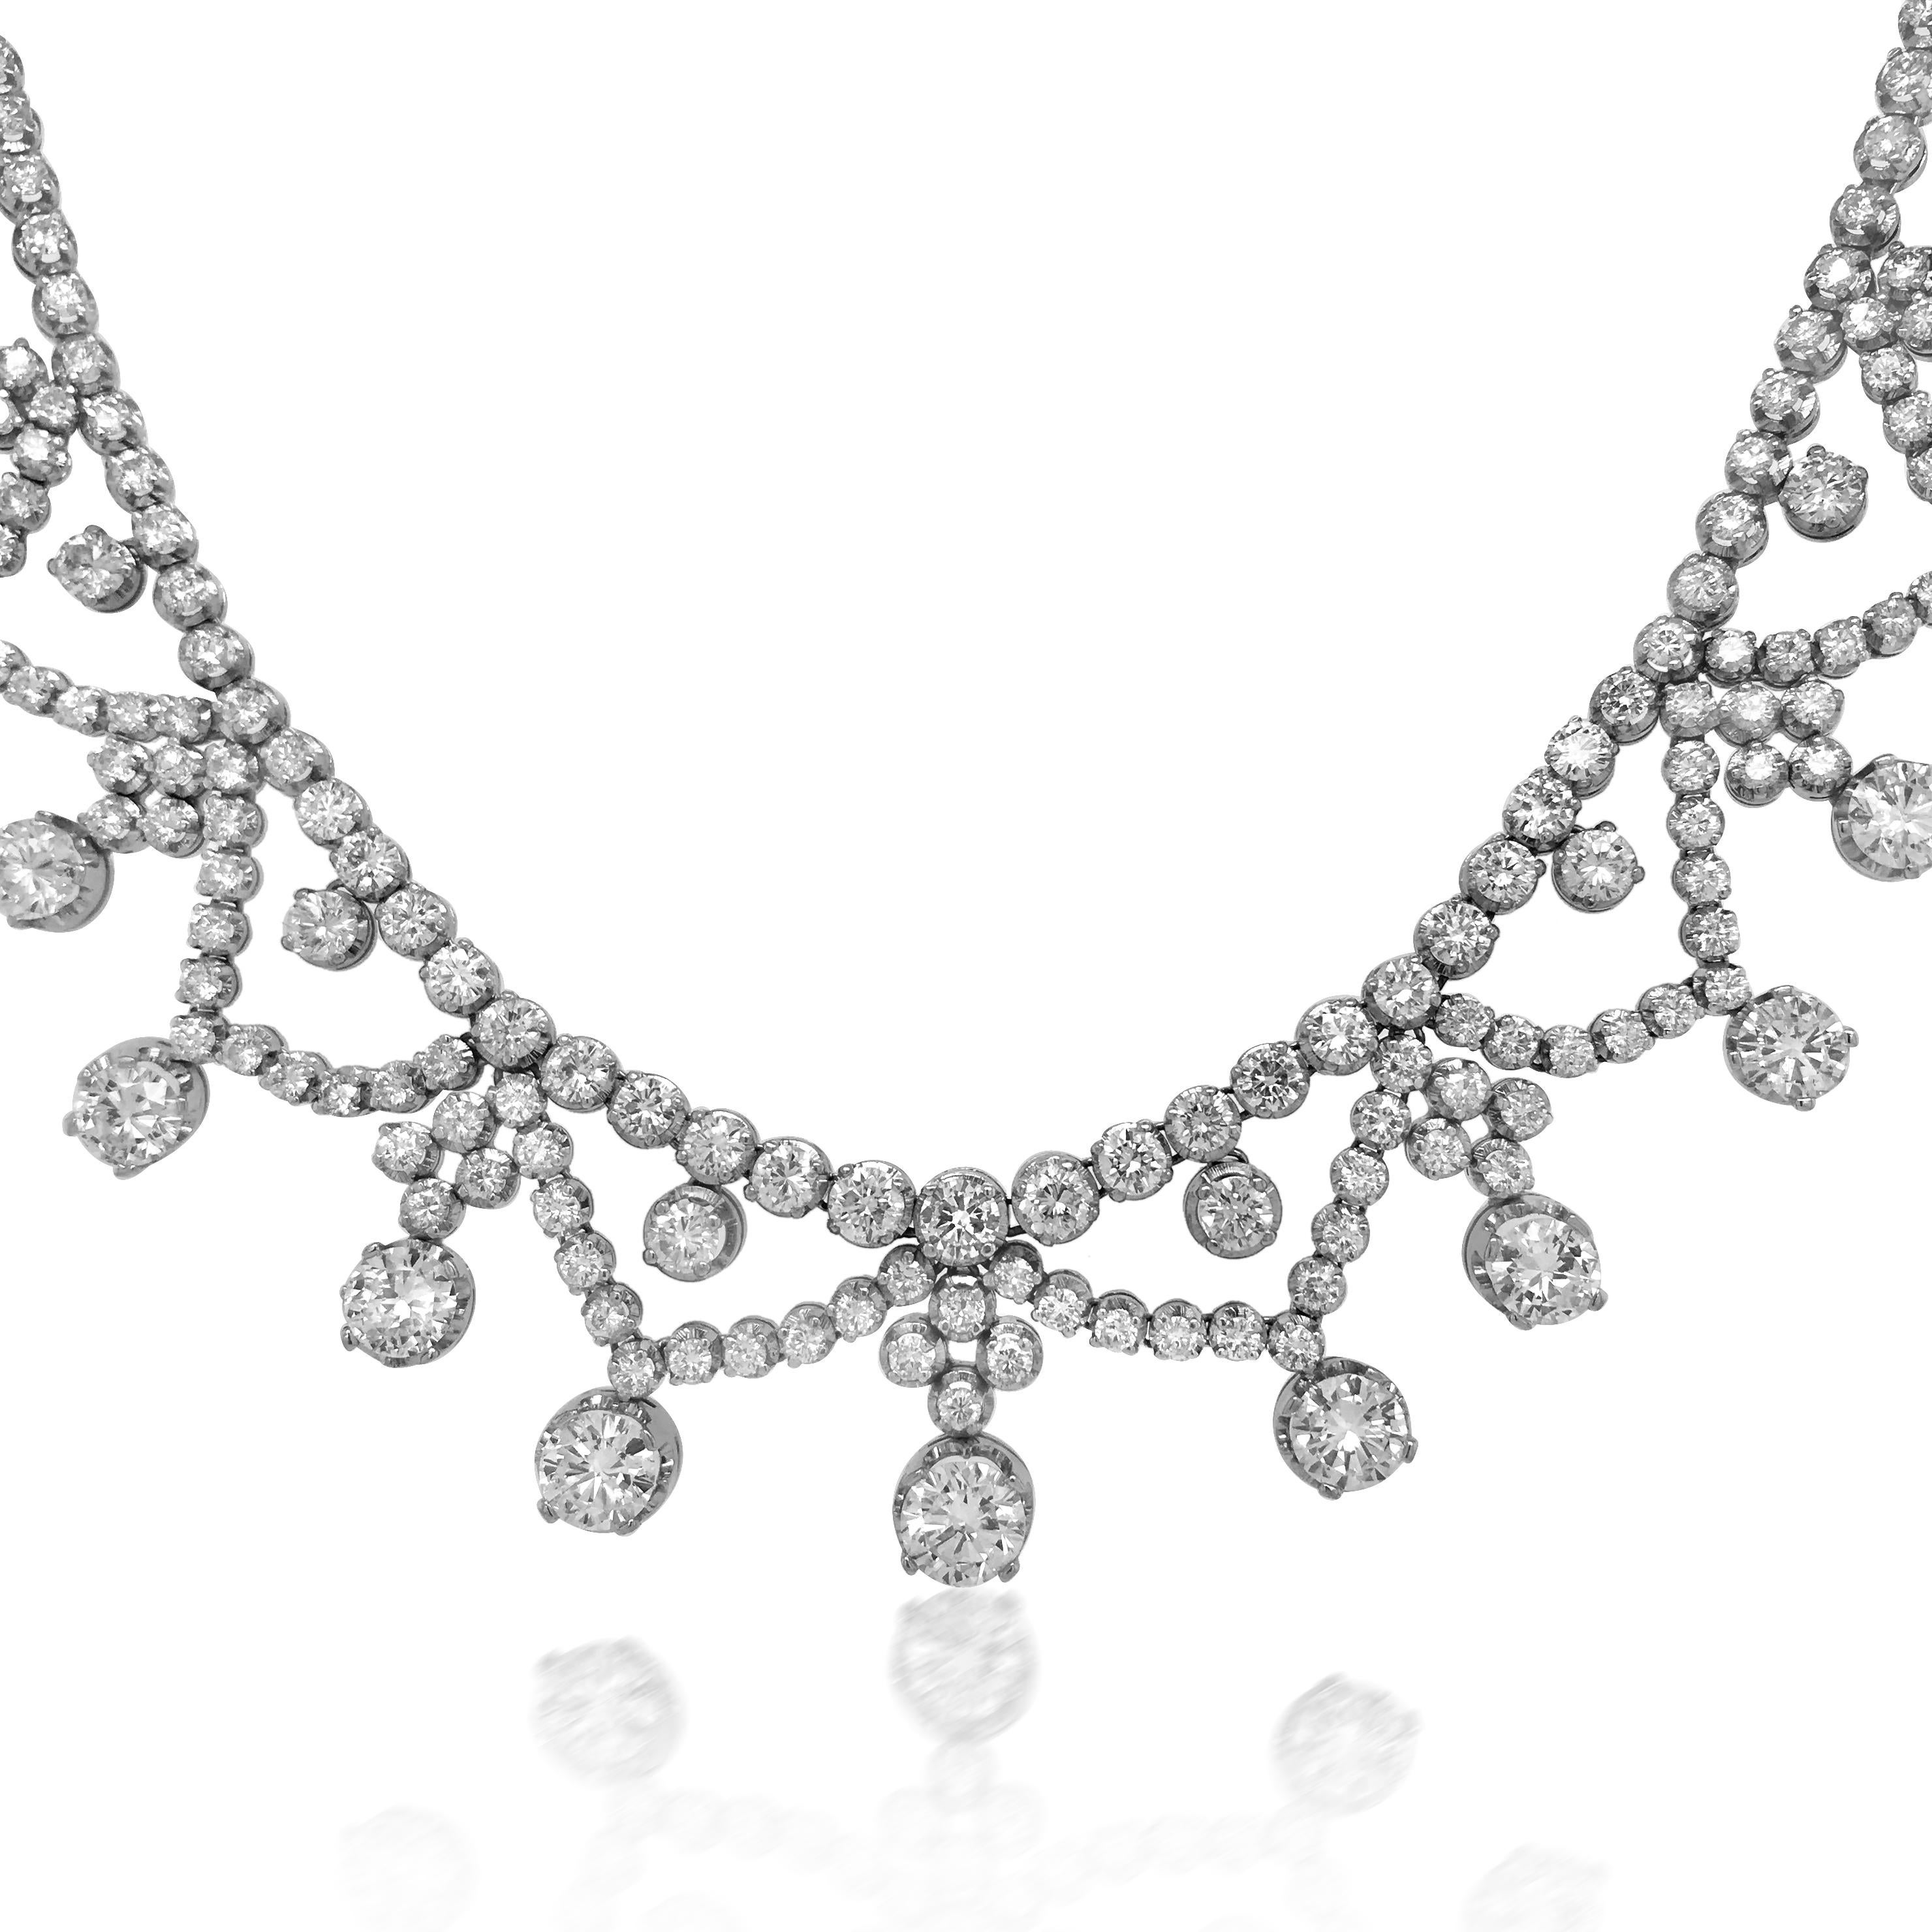 This conspicuous diamond necklace is crafted in solid 18K white gold, weighing 69 grams and measuring 45cm (17 3/4'') long. Depicting 13 genuine large round brilliant cut diamonds weighing approx. 15cttw and other 212 RBC diamond around the